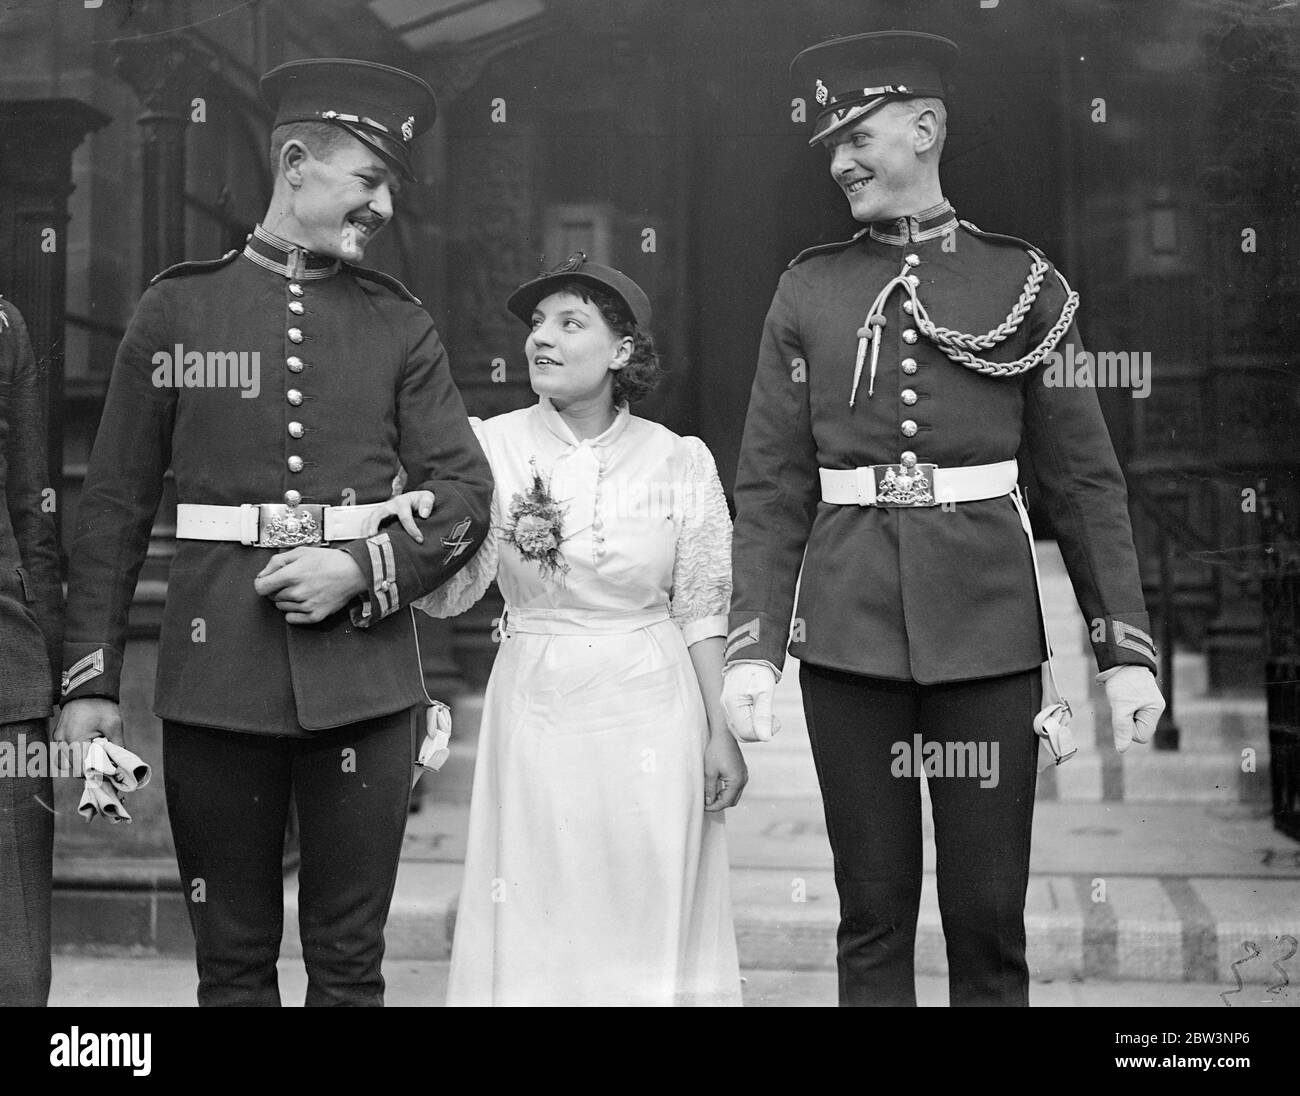 Royal Horse Guard married at Caxton Hall . Trooper K Knox of the Royal Horse Guards was married at Caxton Hall register office to Miss Eileen Gamage . 23 November 1935 Stock Photo